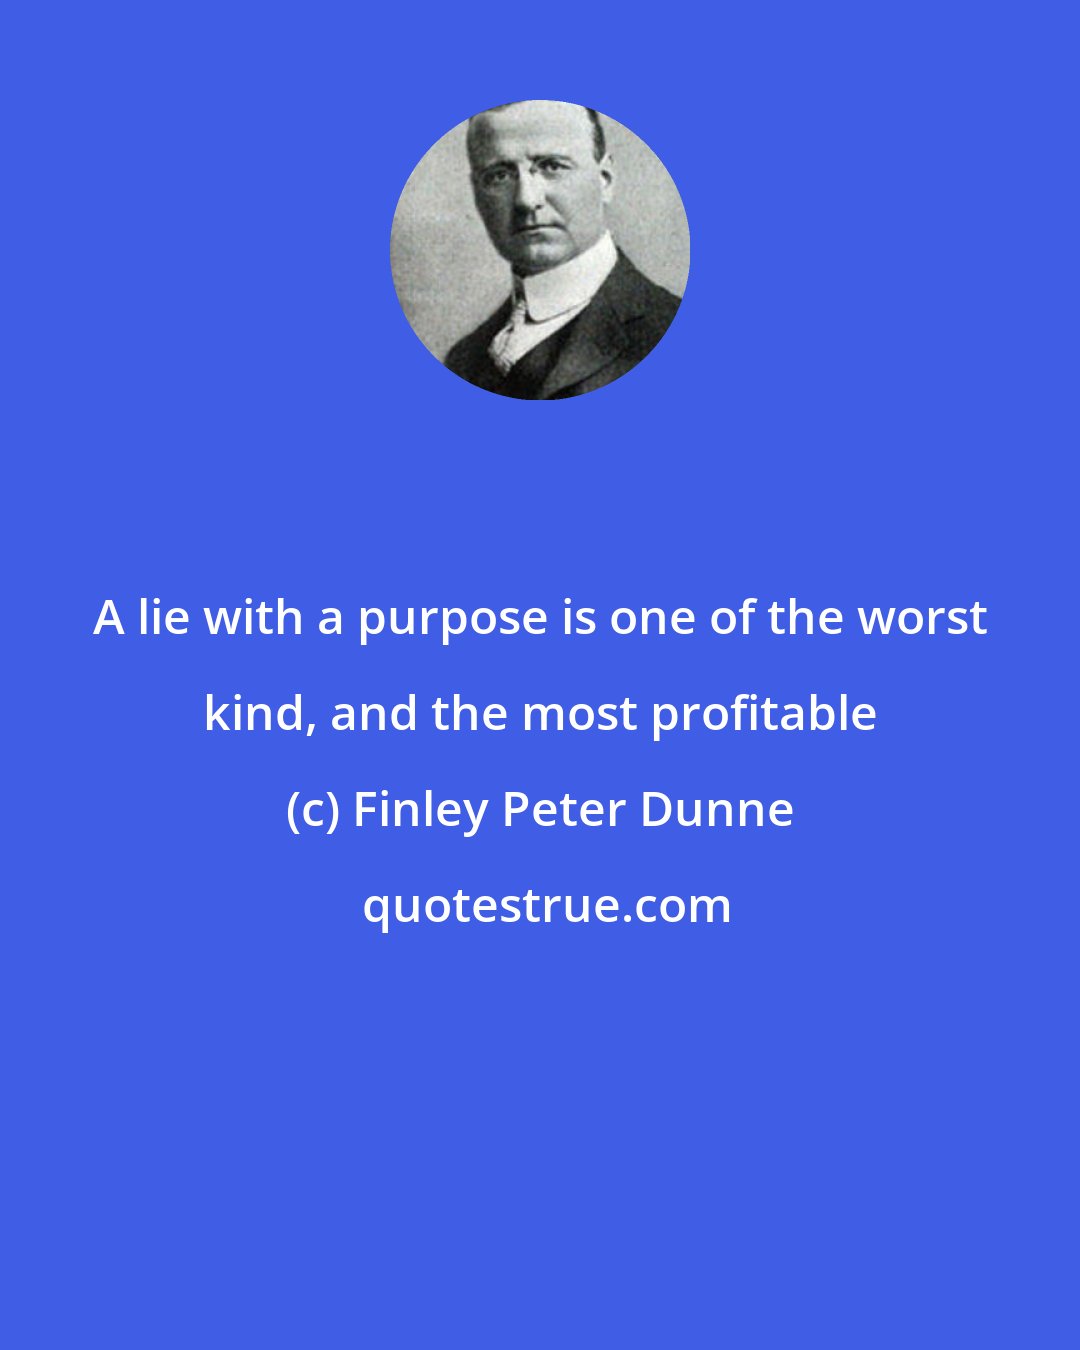 Finley Peter Dunne: A lie with a purpose is one of the worst kind, and the most profitable